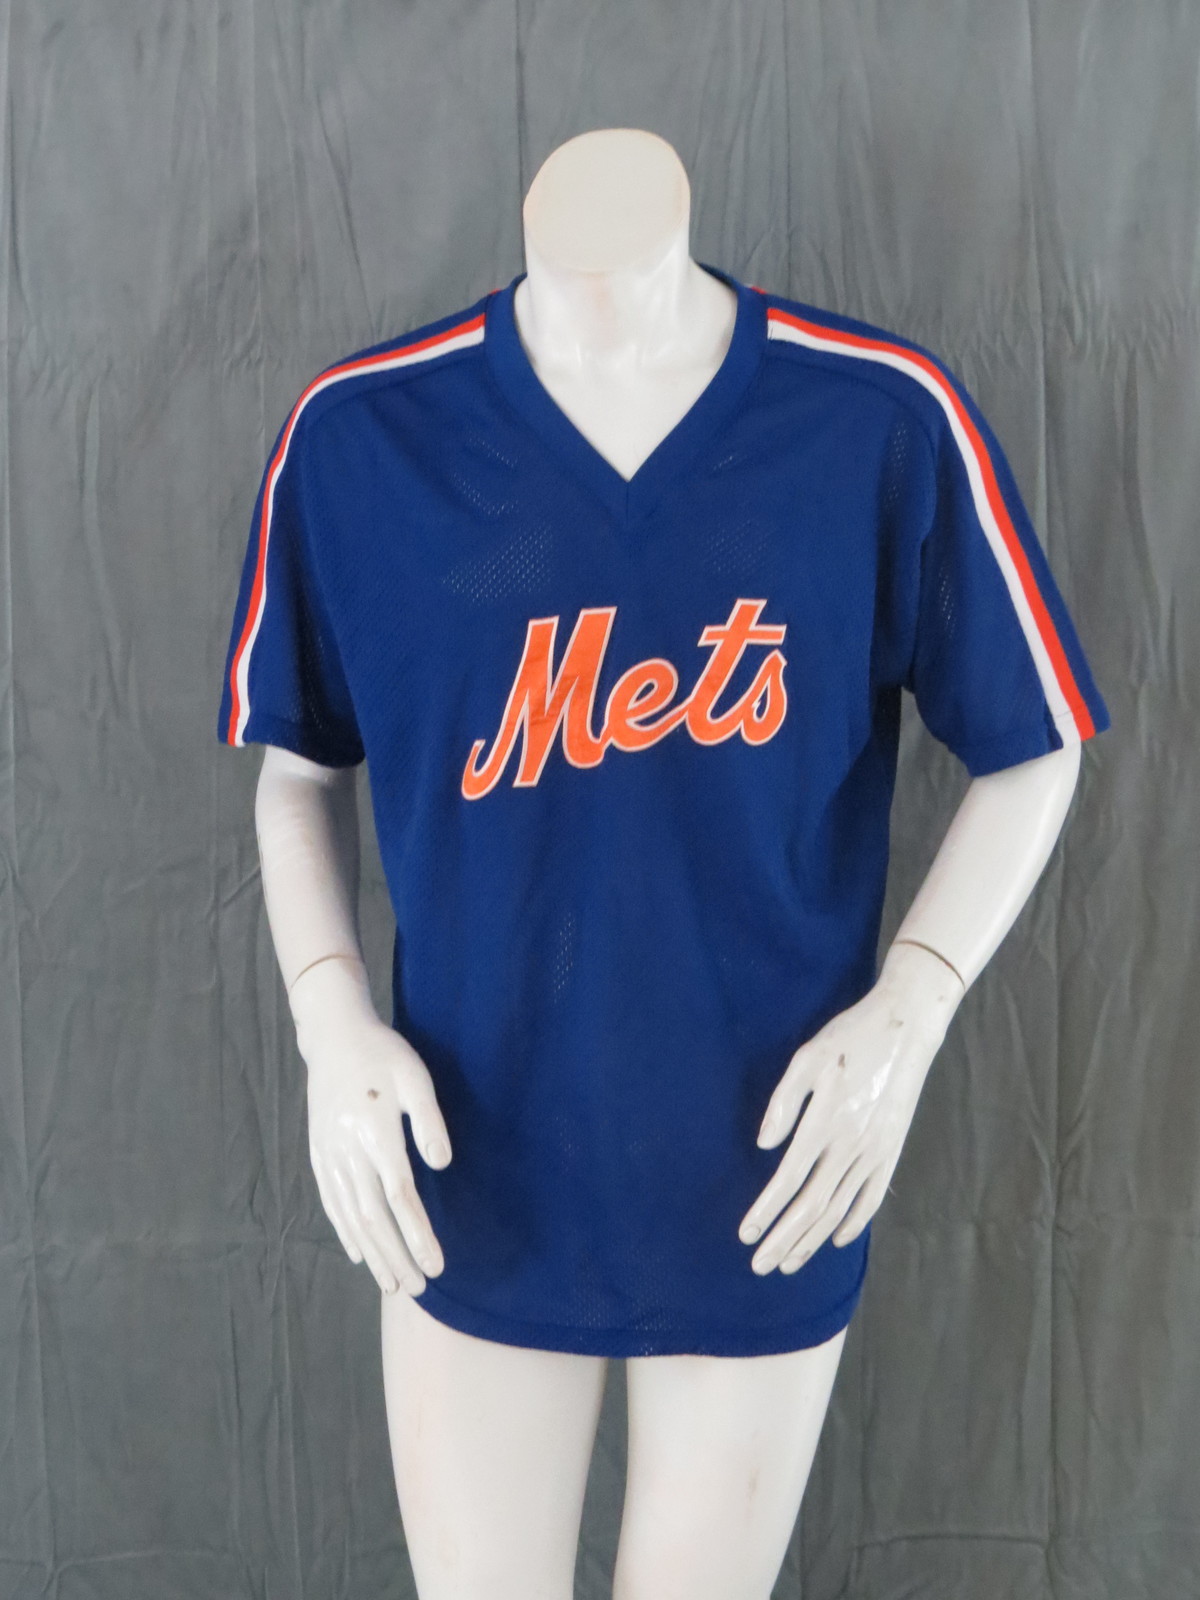 Primary image for New York Mets Jersey (VTG) - 1980s Away jersey by Rawlings - Men's Extra Large